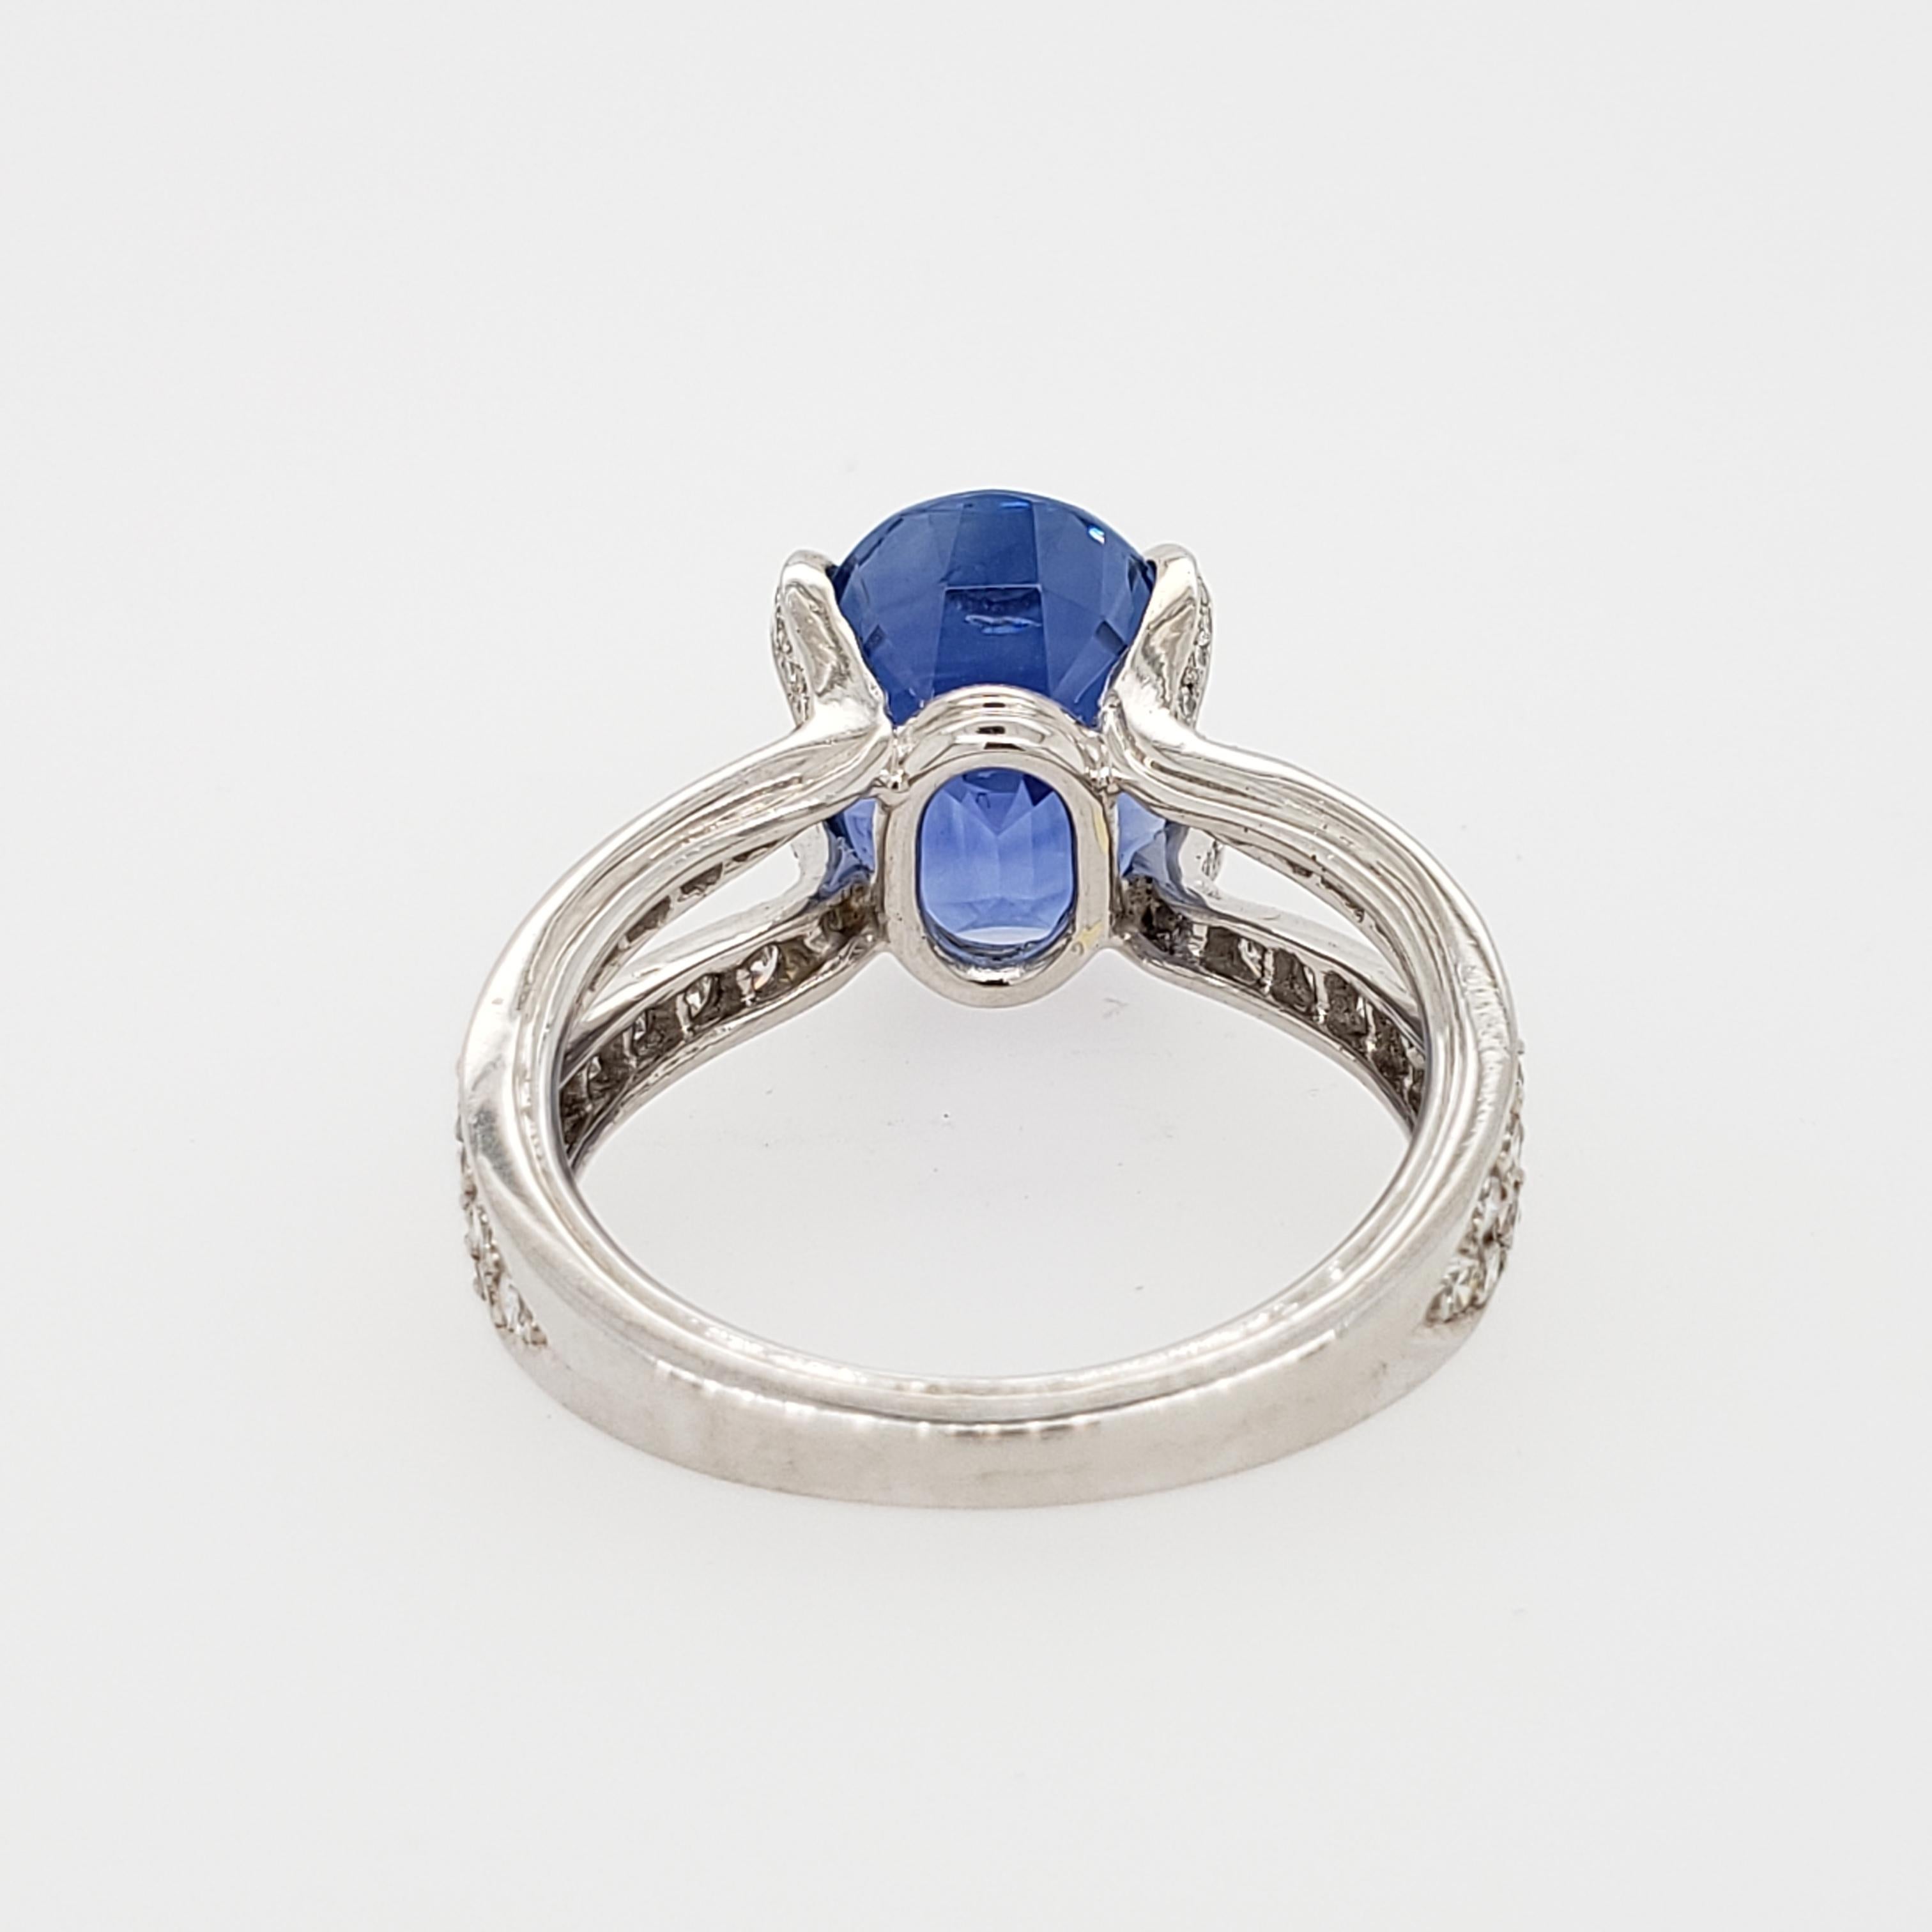 Brilliant Cut Vintage Ceylon Sapphire and Diamond Ring by Tiffany and Co